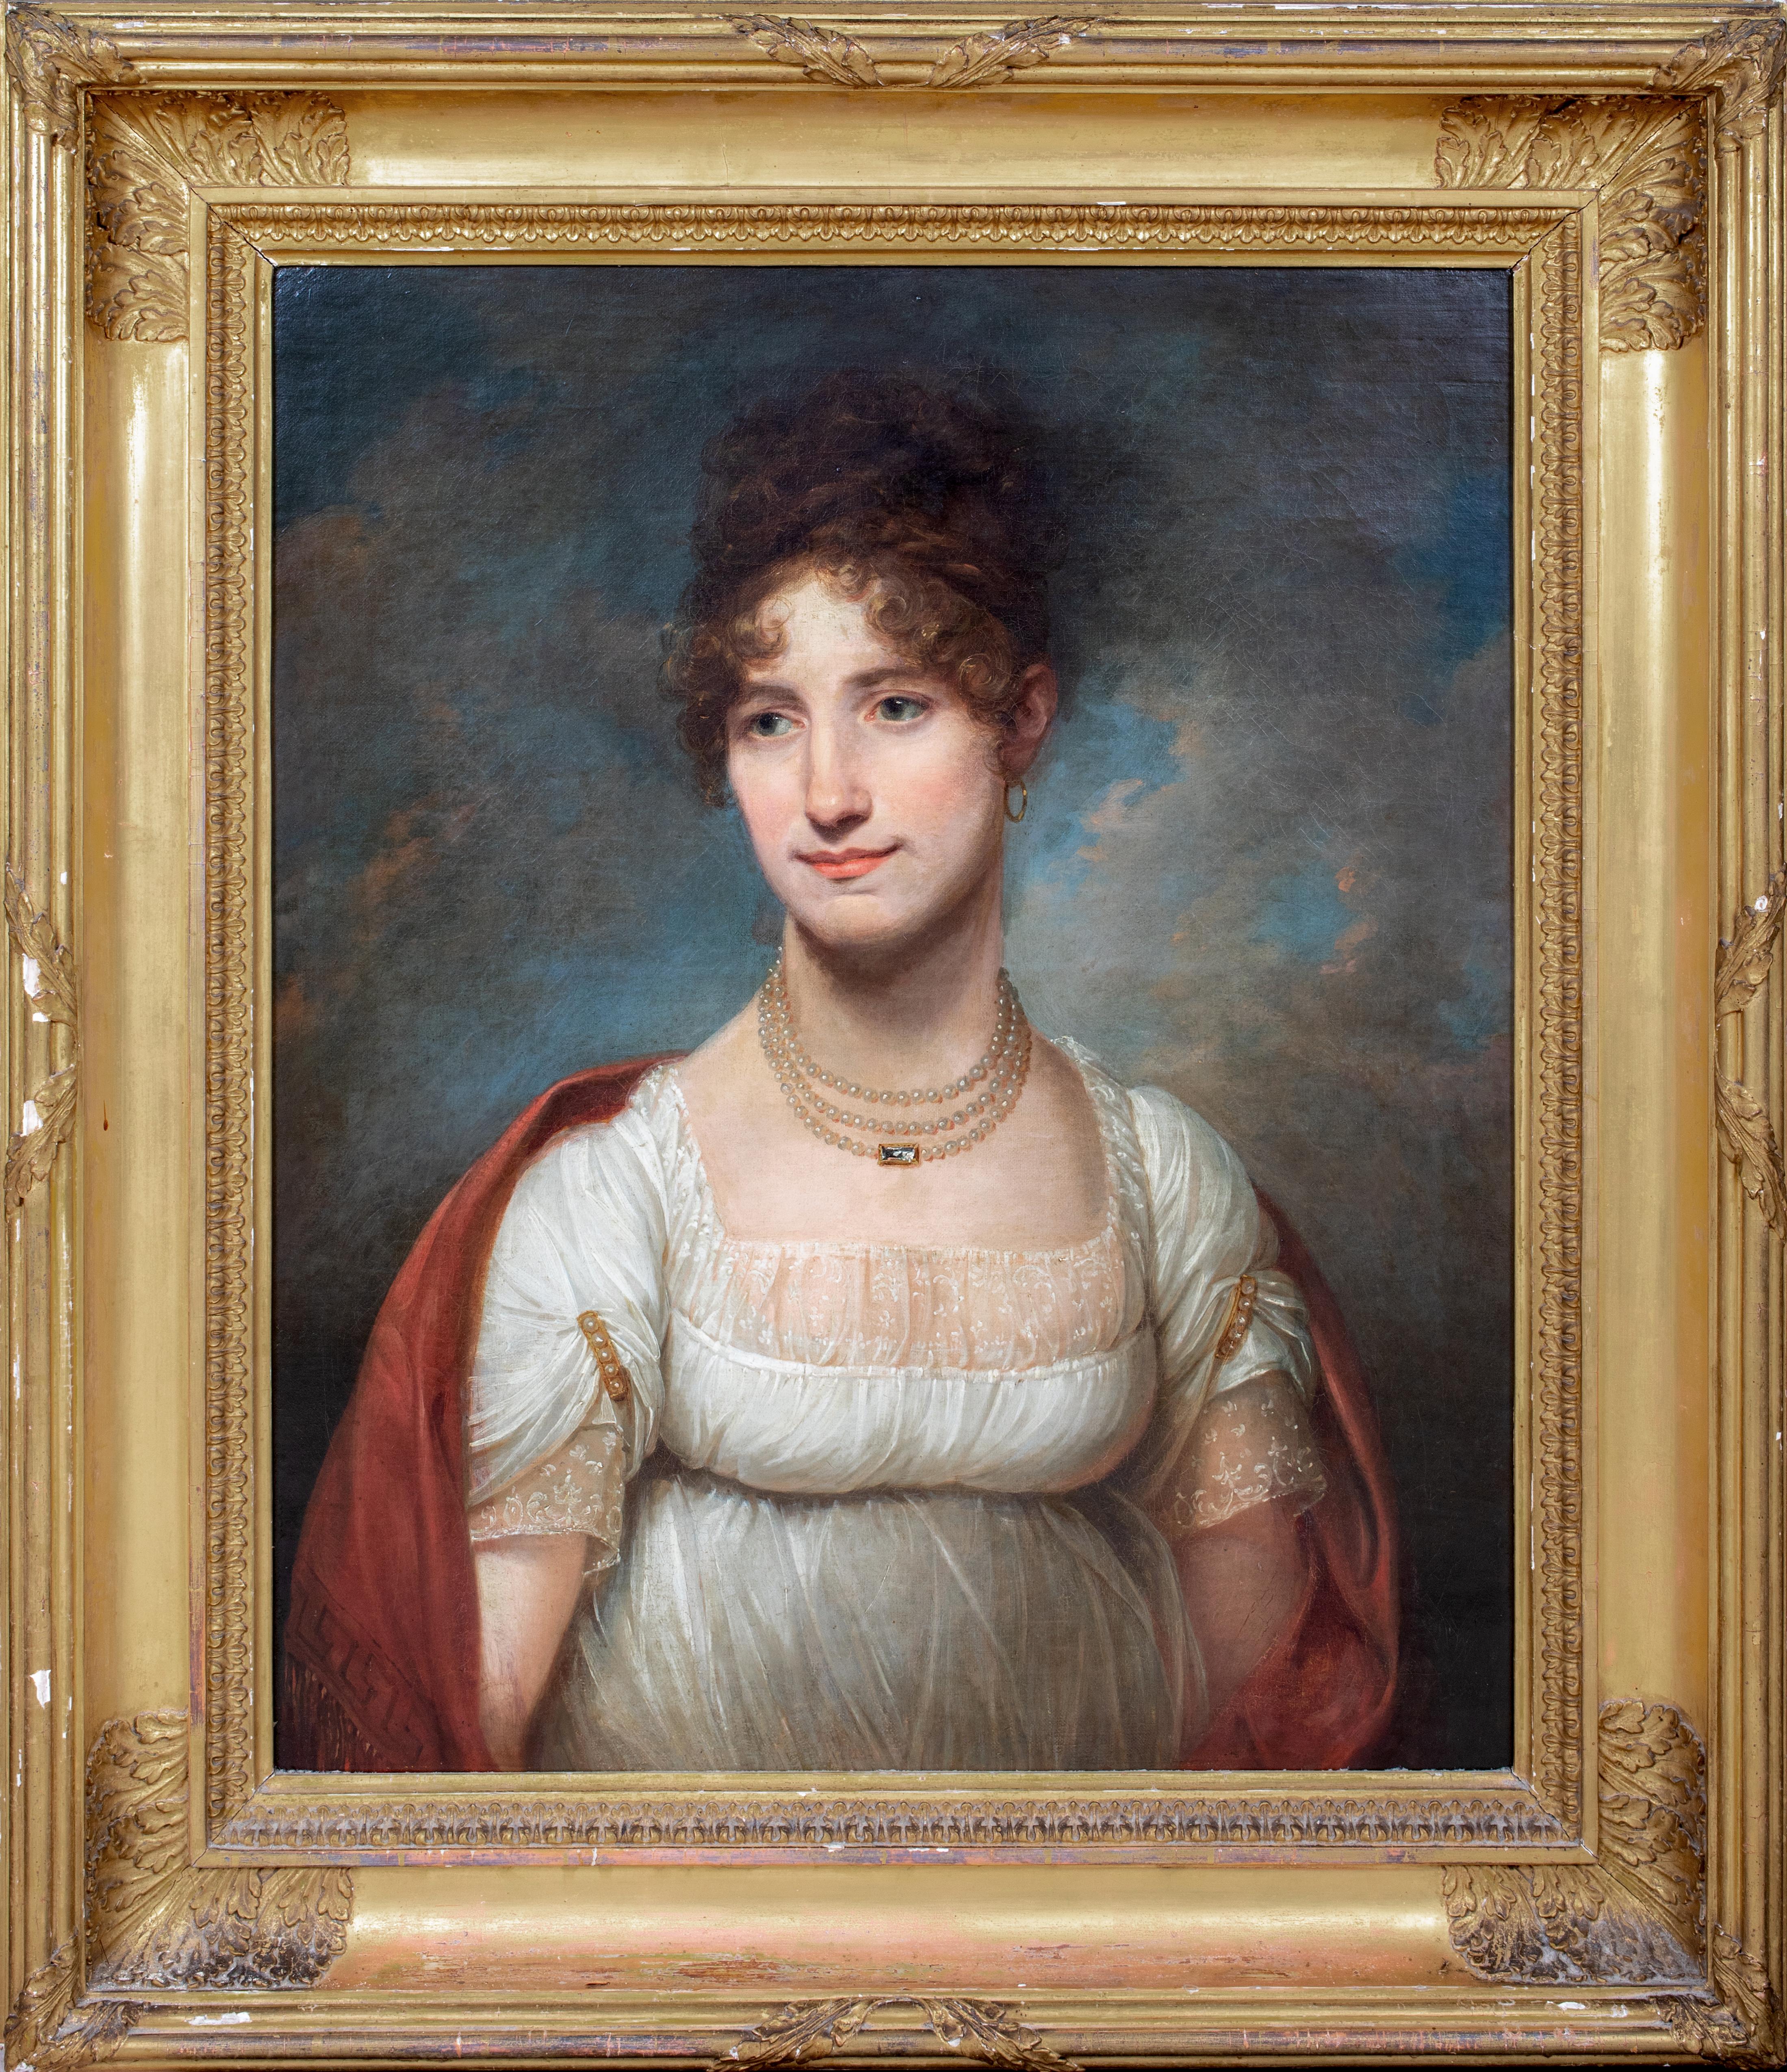 Portrait of Harriet Muller (nee Garland), circa 1805

attributed to Sir William Beechey (1753-1859)

Large early 19th Century Georgian portrait of Harriet Muller of Ongar, Essex, oil on canvas. Excellent quality and condition circa 1805 portrait of